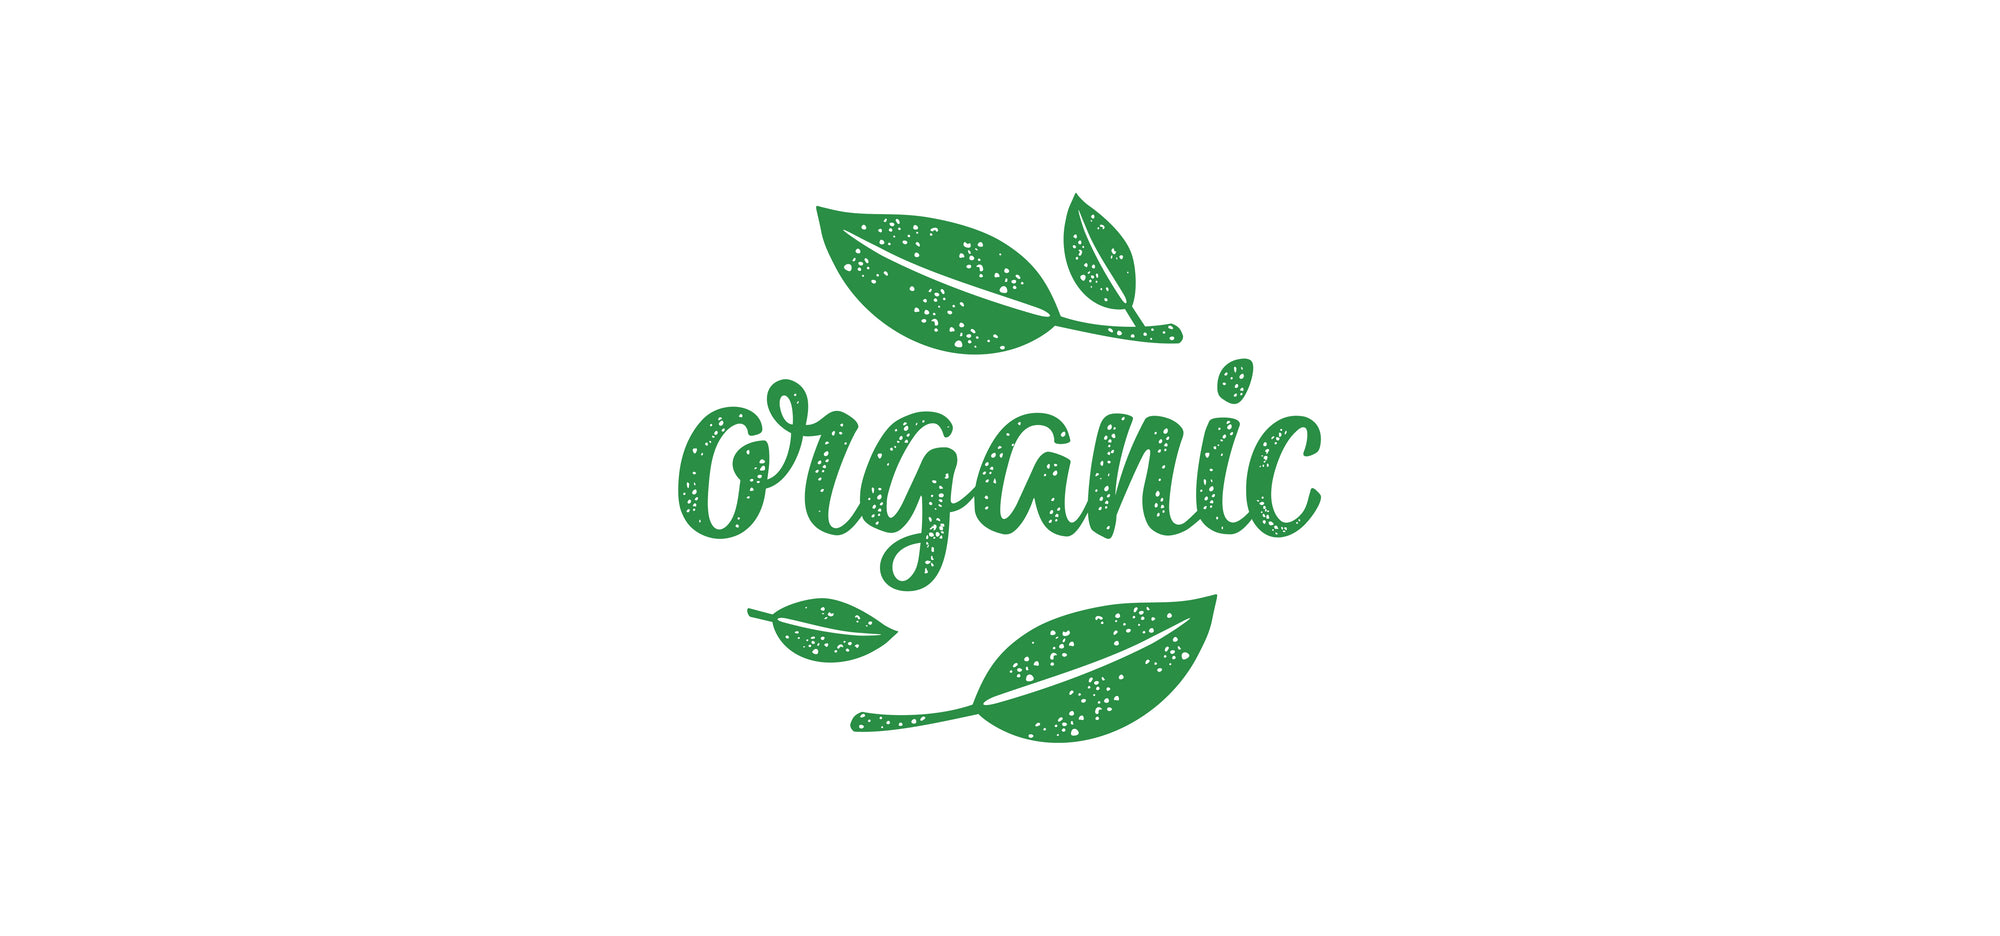 We grow organic greens to ensure only the healthiest of plants are feeding our bodies.